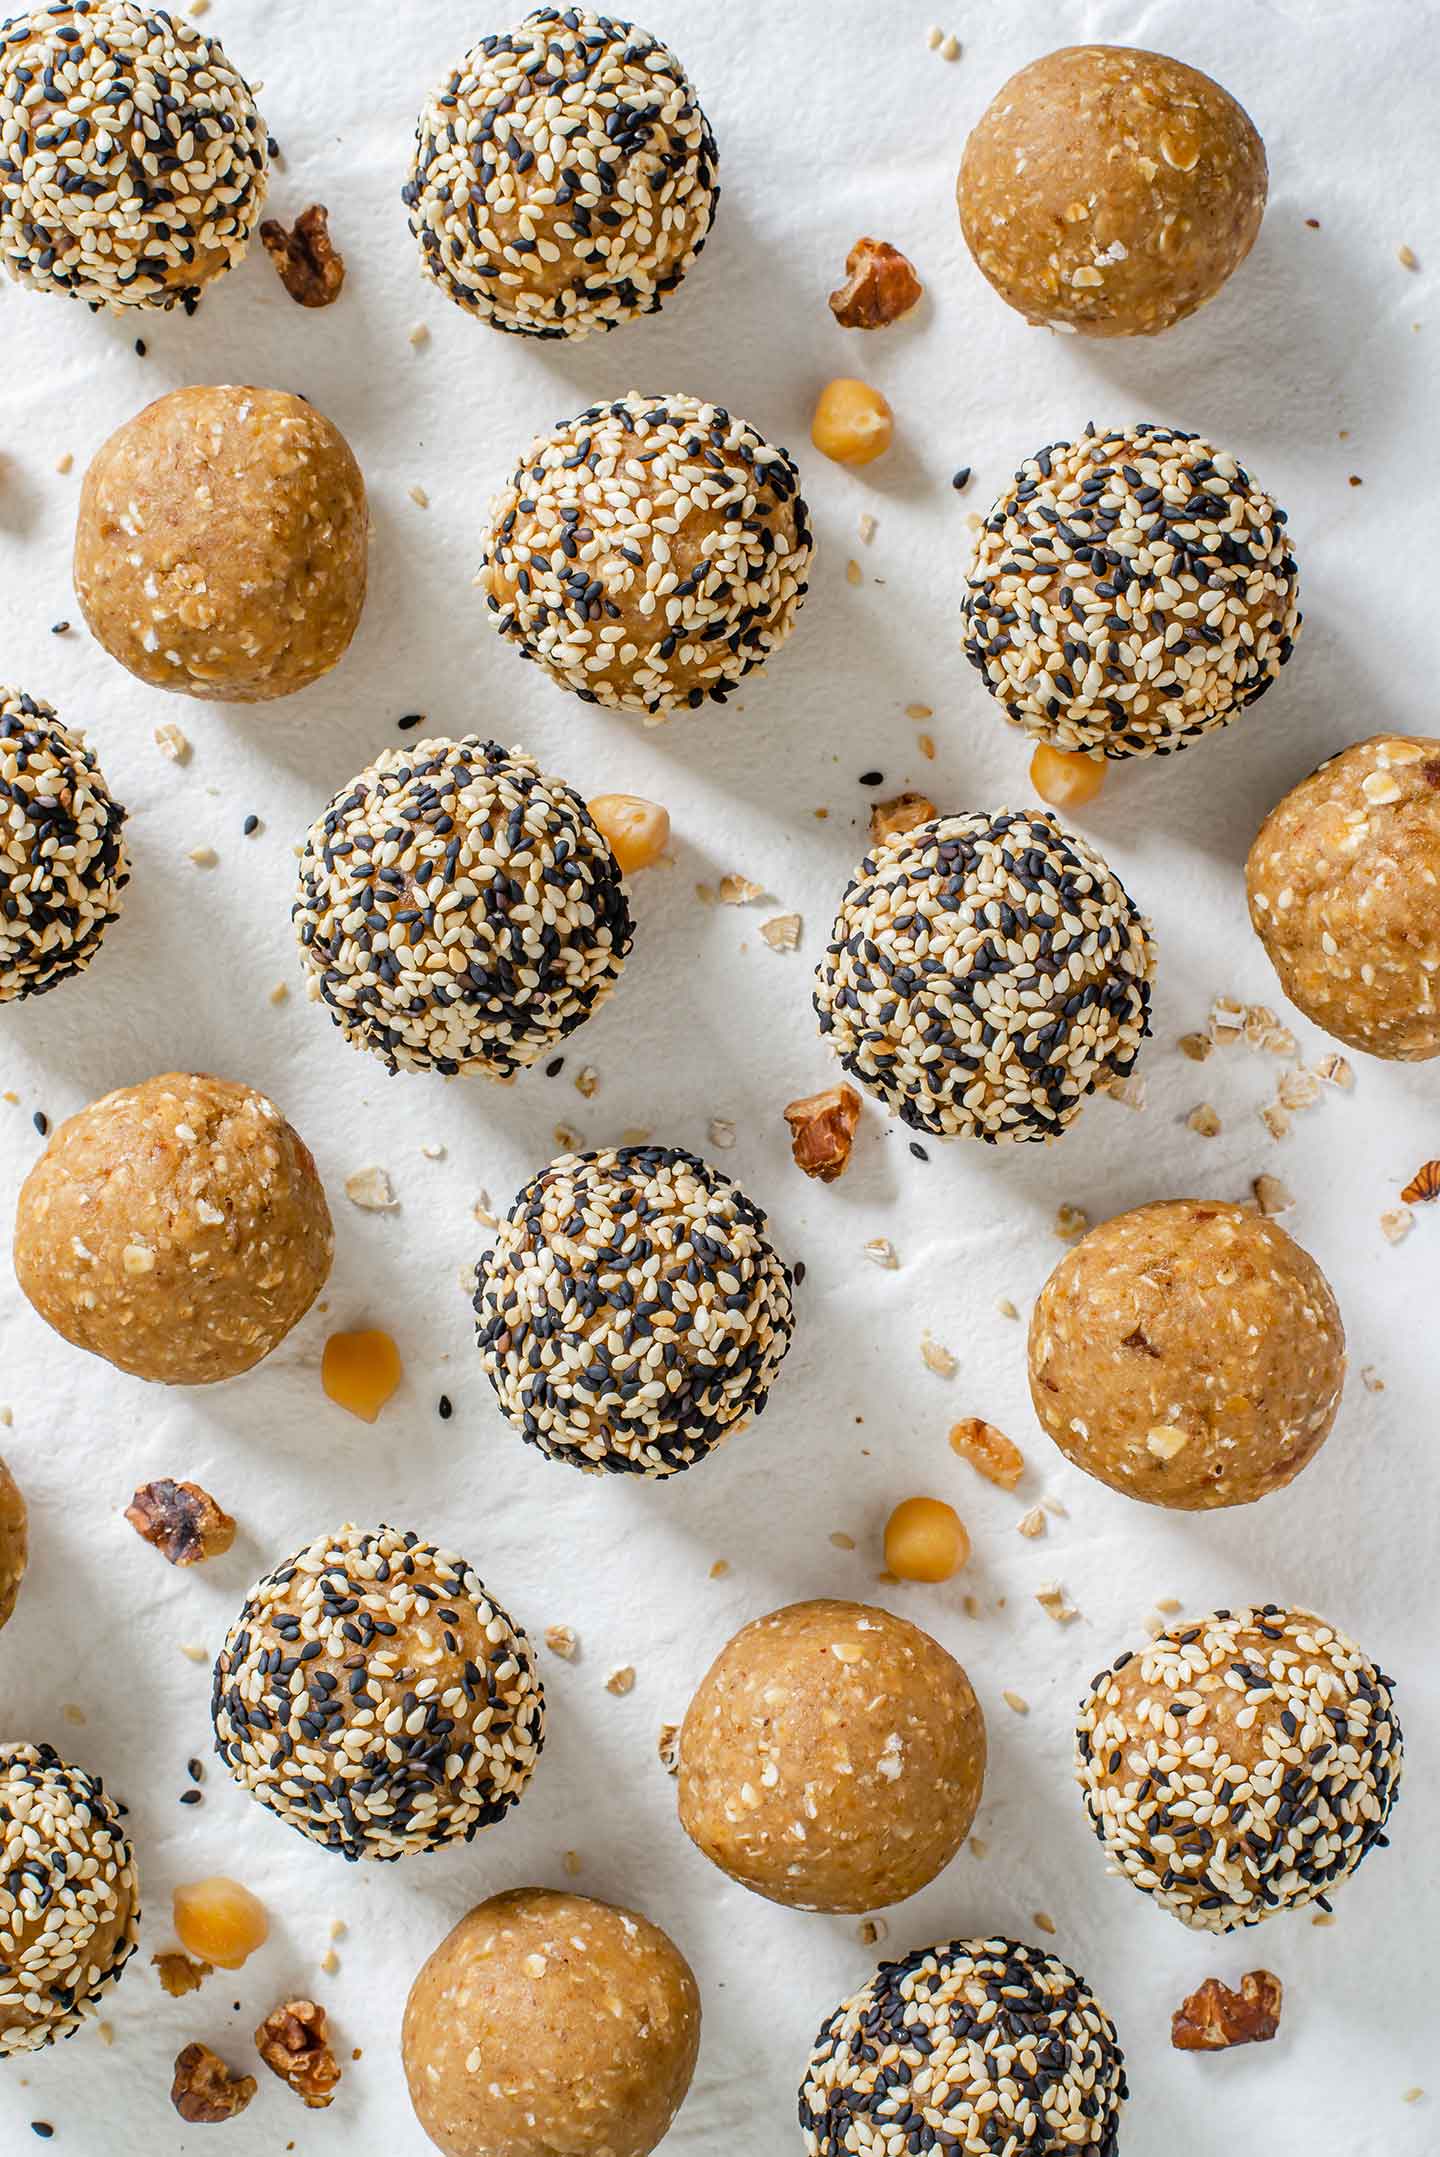 Top down view of chickpea tahini protein balls on a white tray. Some balls are rolled in toasted sesame seeds.